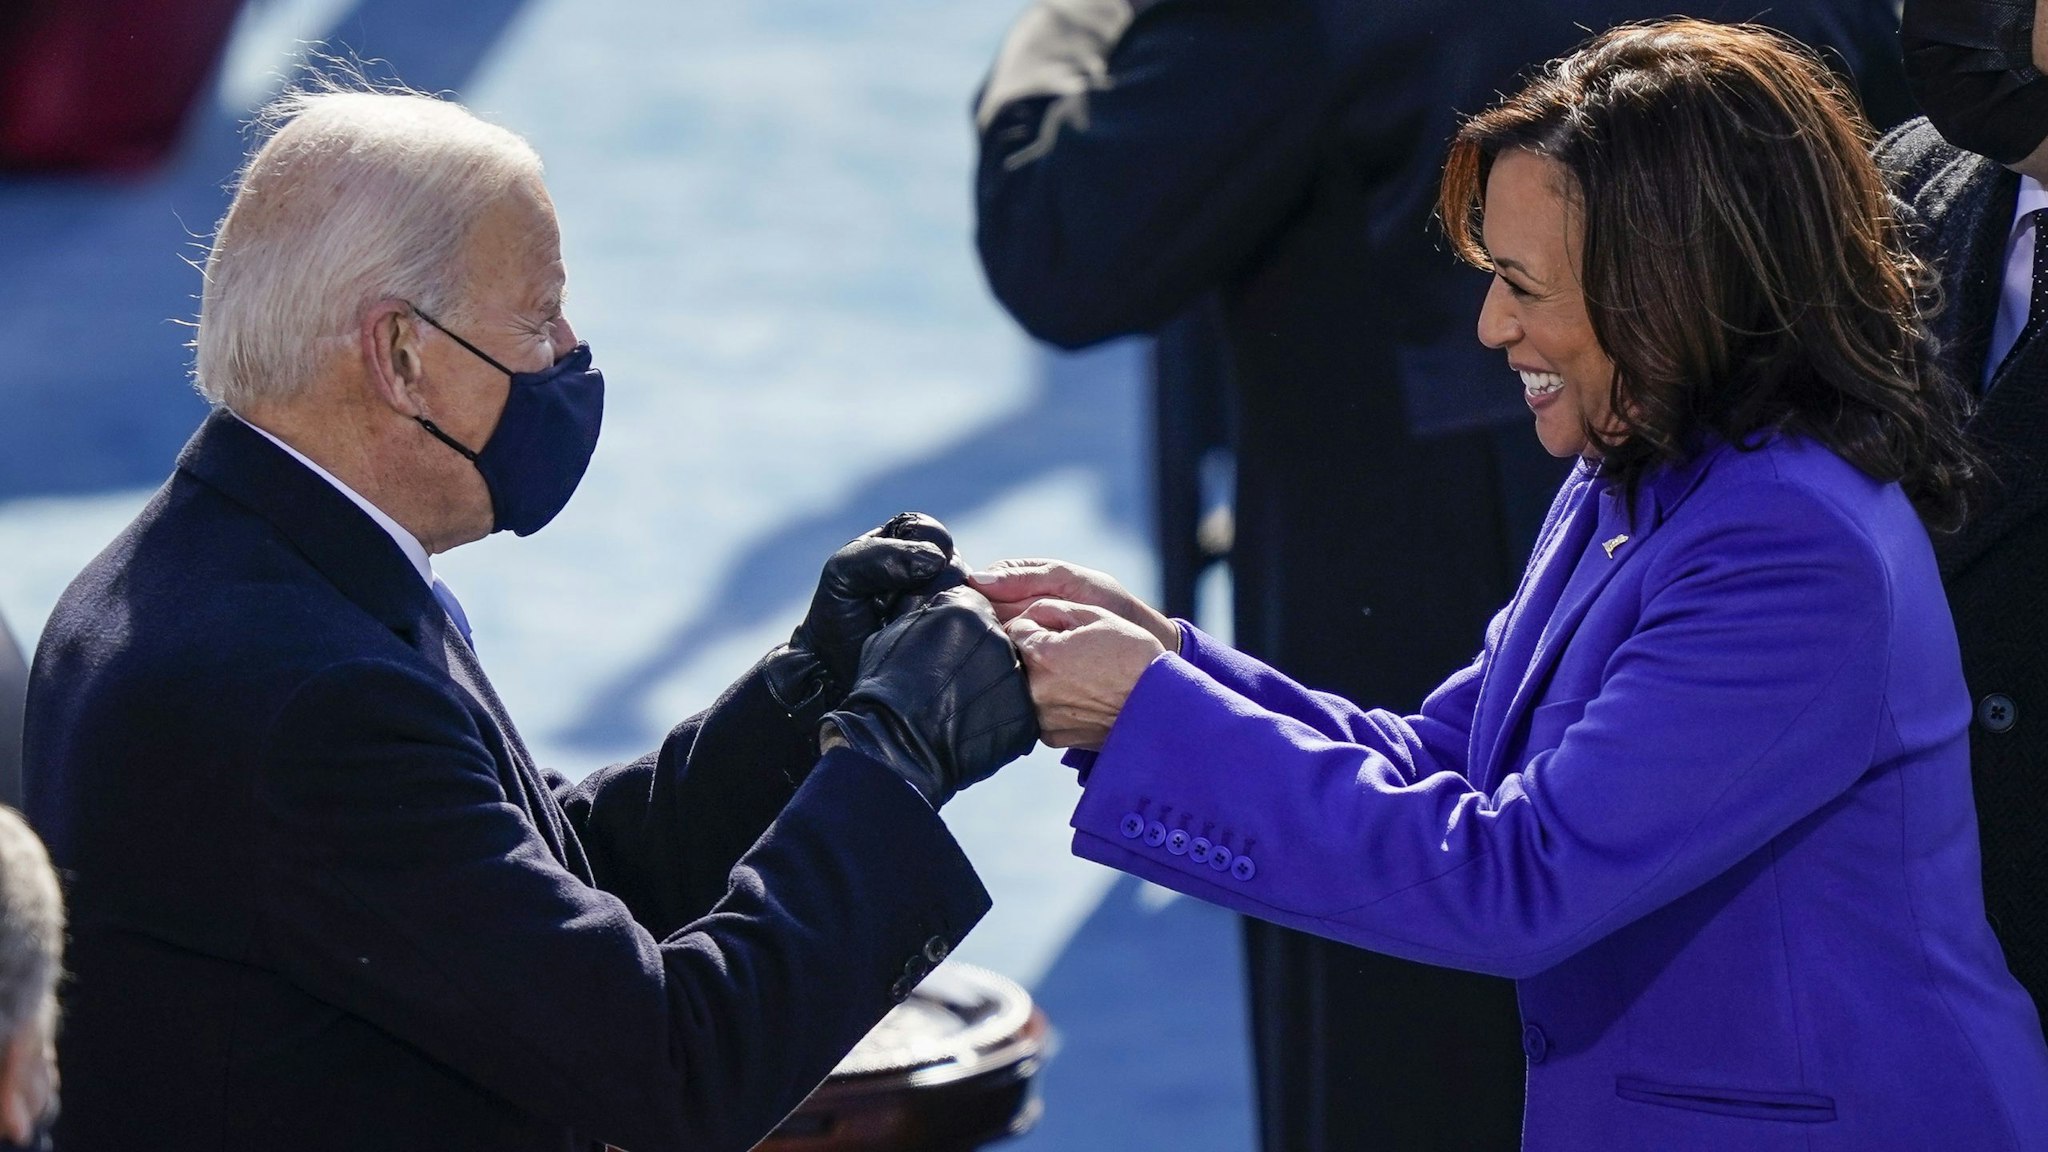 WASHINGTON, DC - JANUARY 20: U.S. President-elect Joe Biden fist bumps newly sworn-in Vice President Kamala Harris after she took the oath of office on the West Front of the U.S. Capitol on January 20, 2021 in Washington, DC. Biden was sworn in today as the 46th president of the United States.